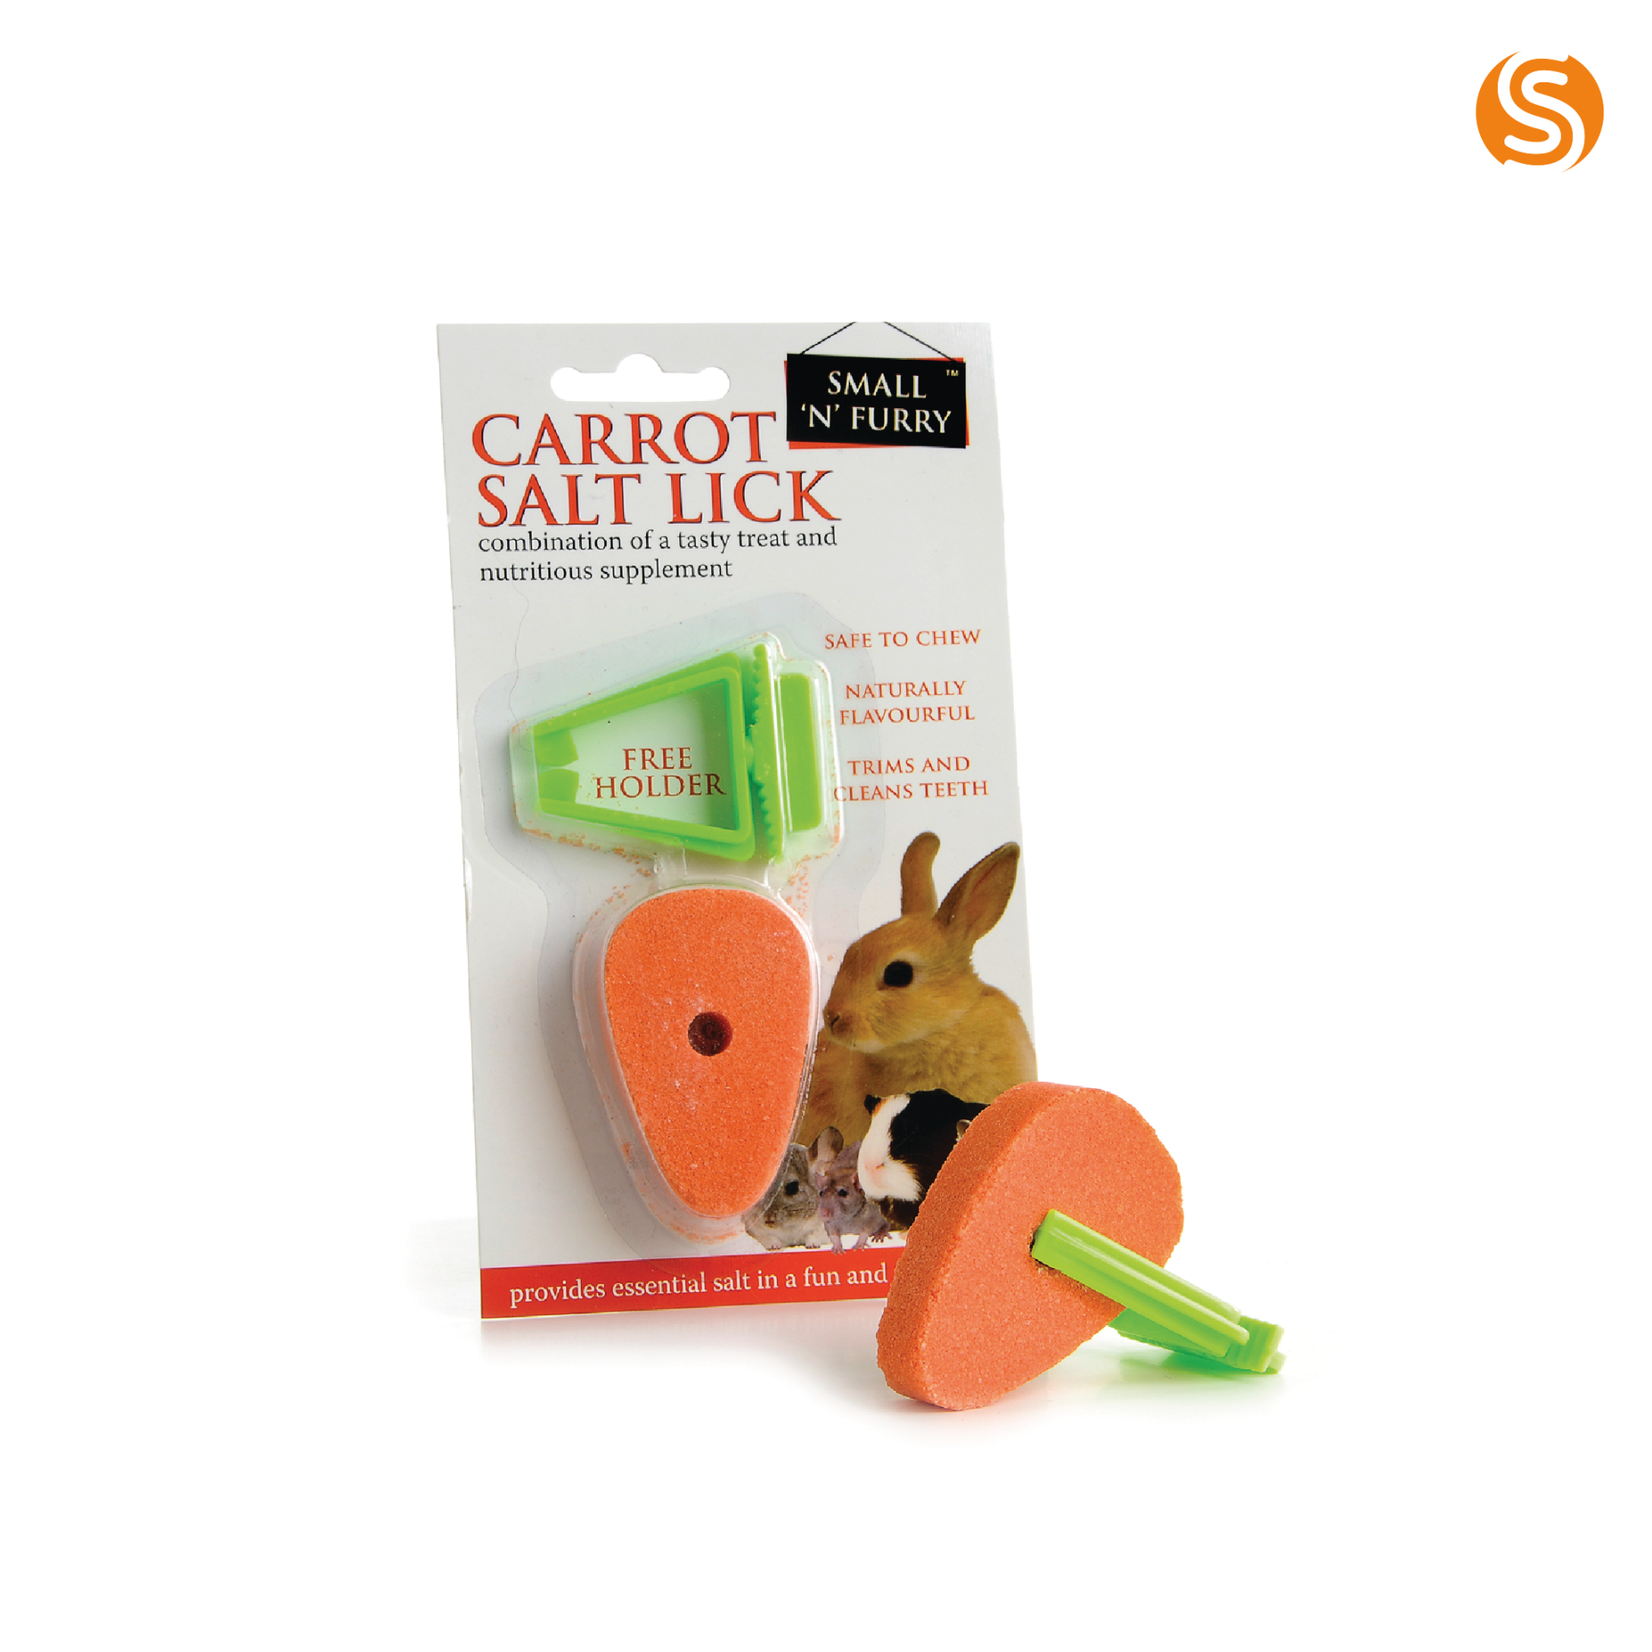 sharples Small N Furry Small Animal Salt Carrot Lick Treat with Holder